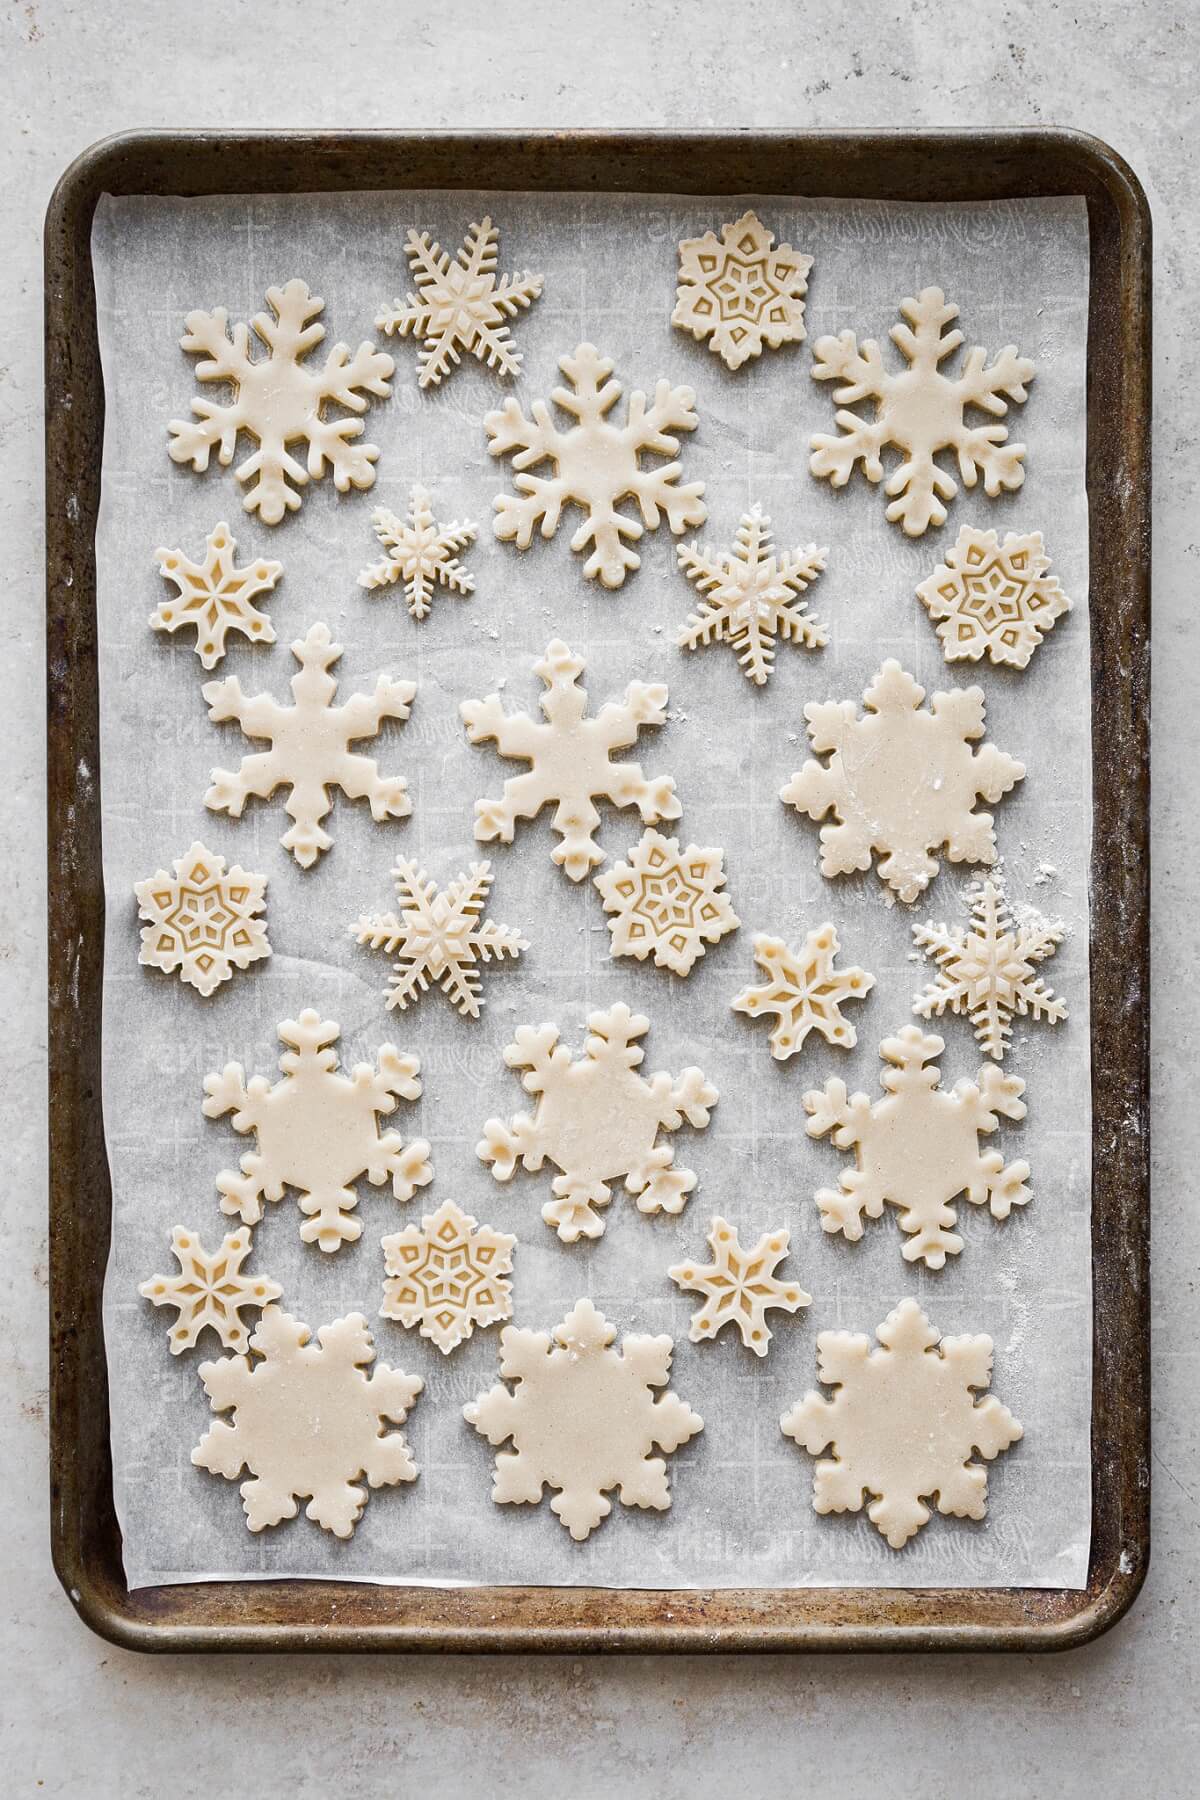 Unbaked snowflake cookies on a baking sheet.